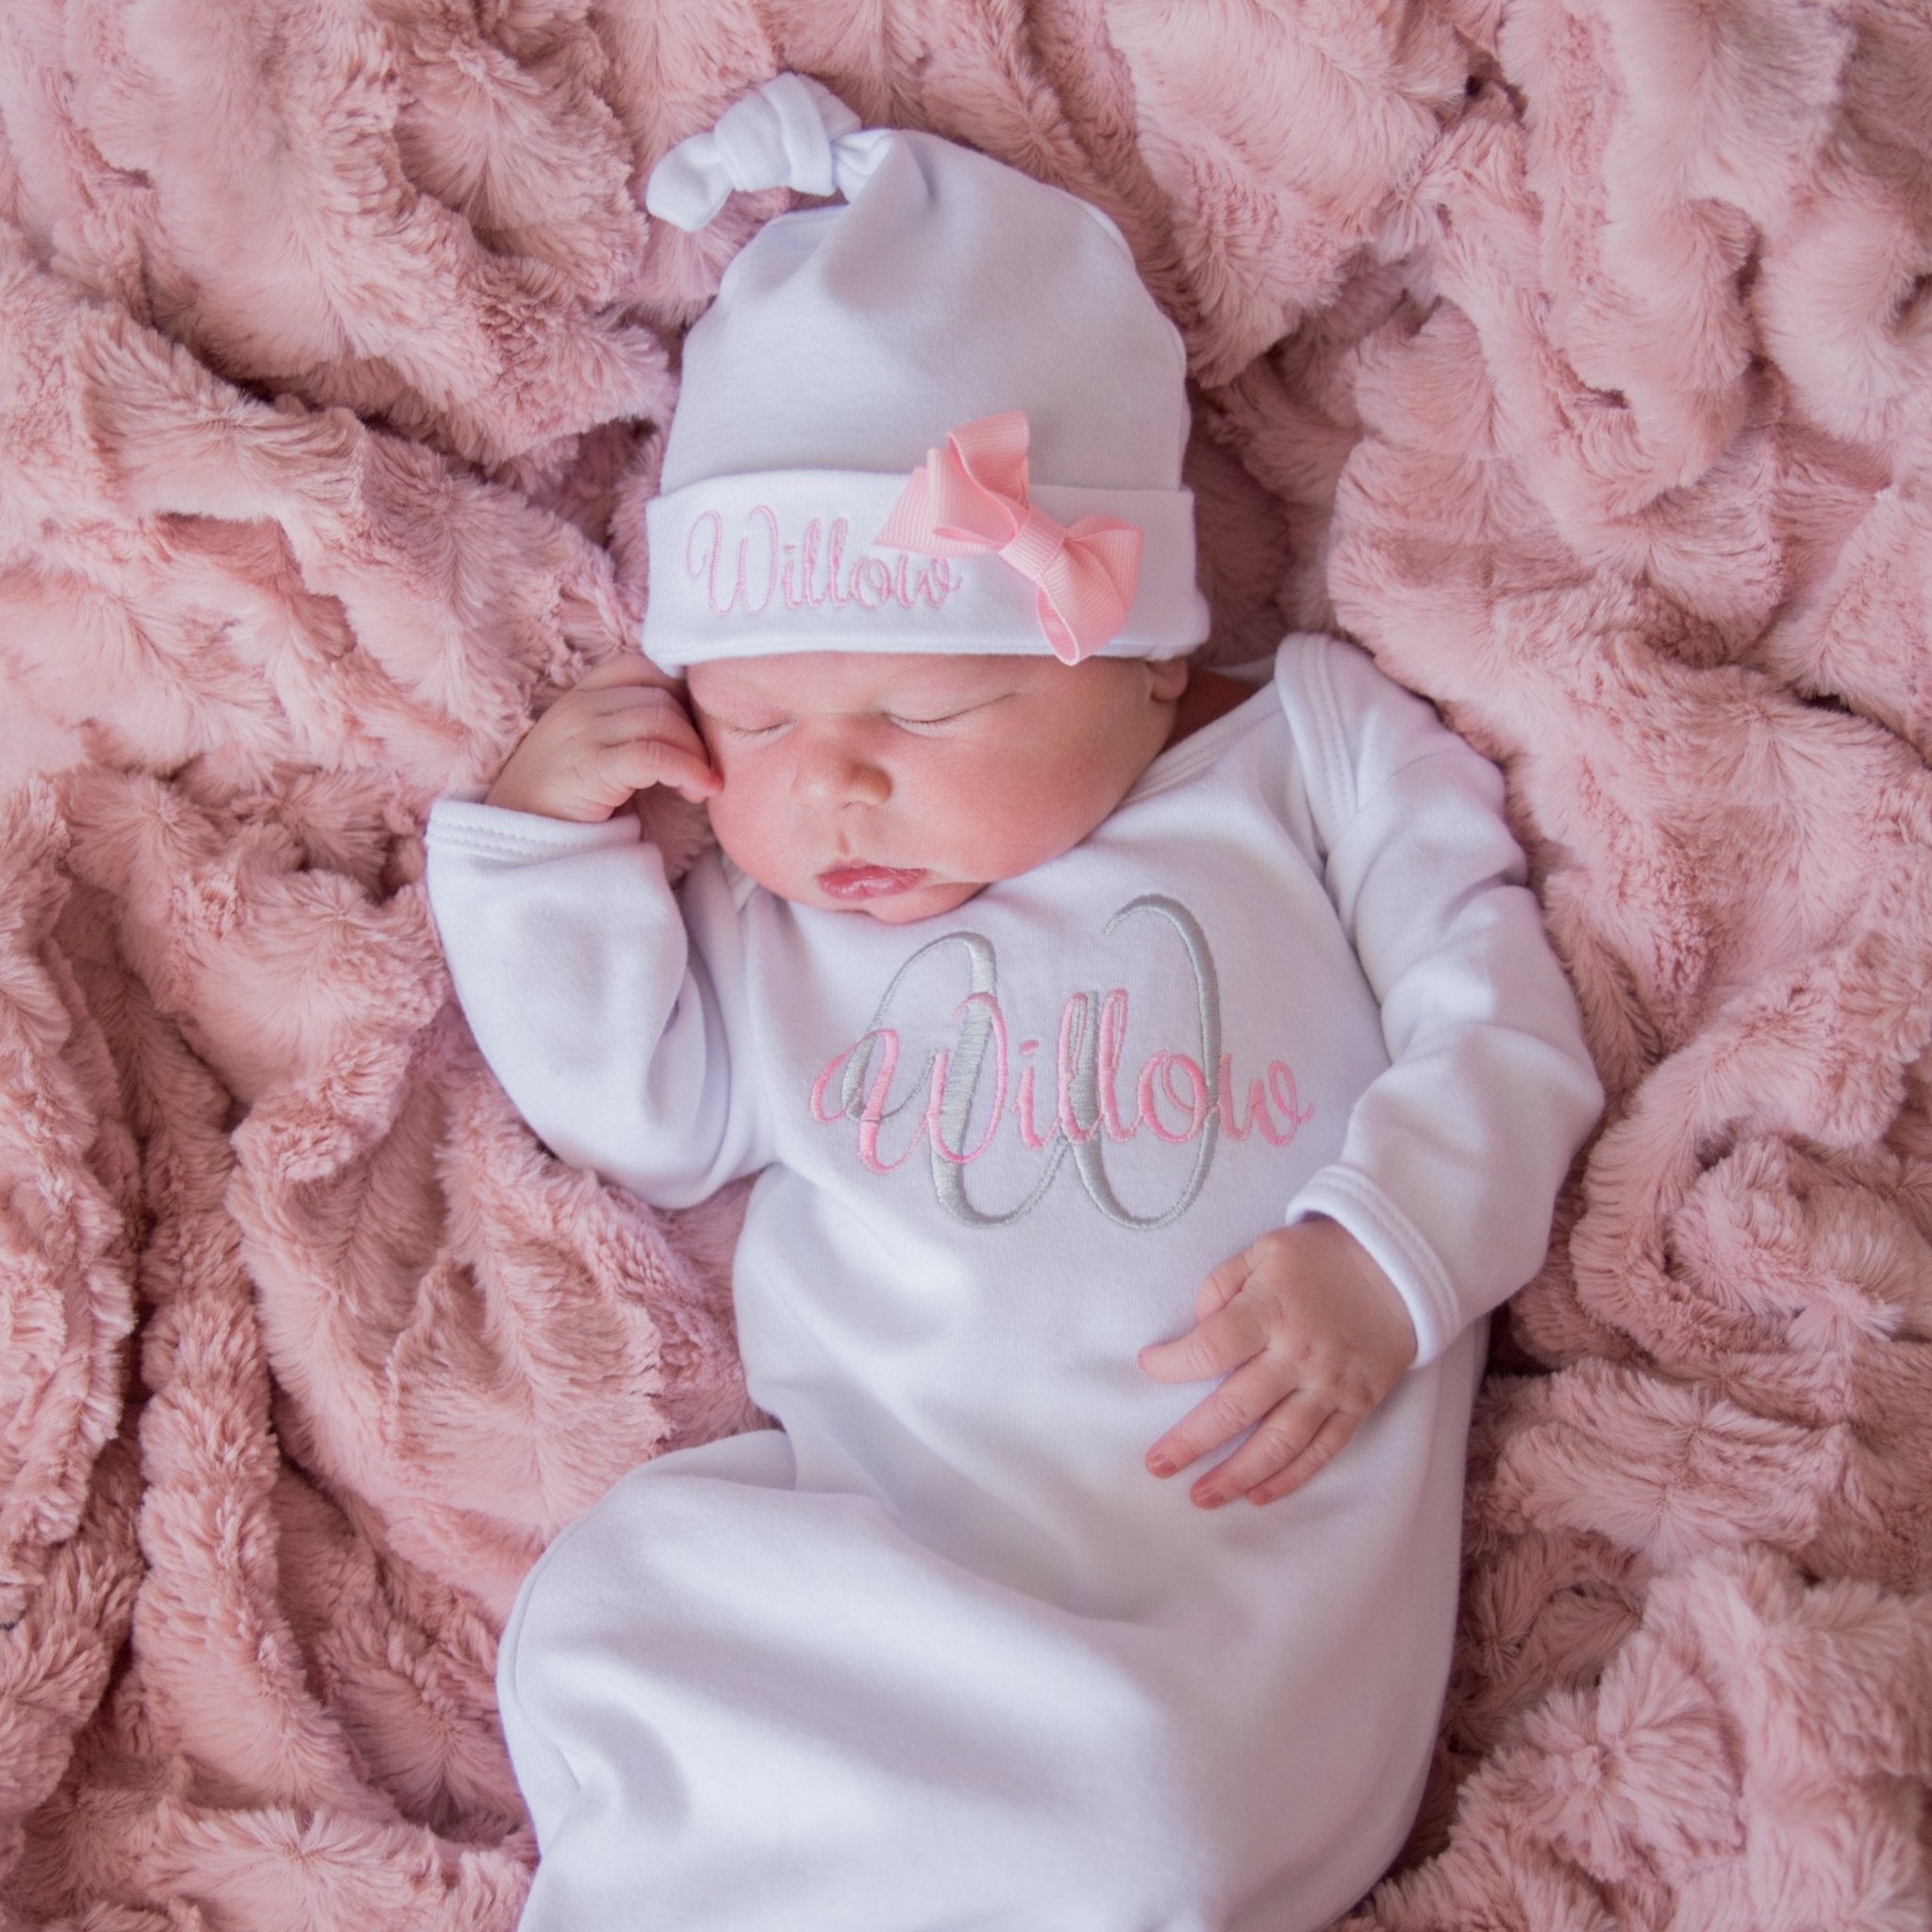 personalized baby outfit sets